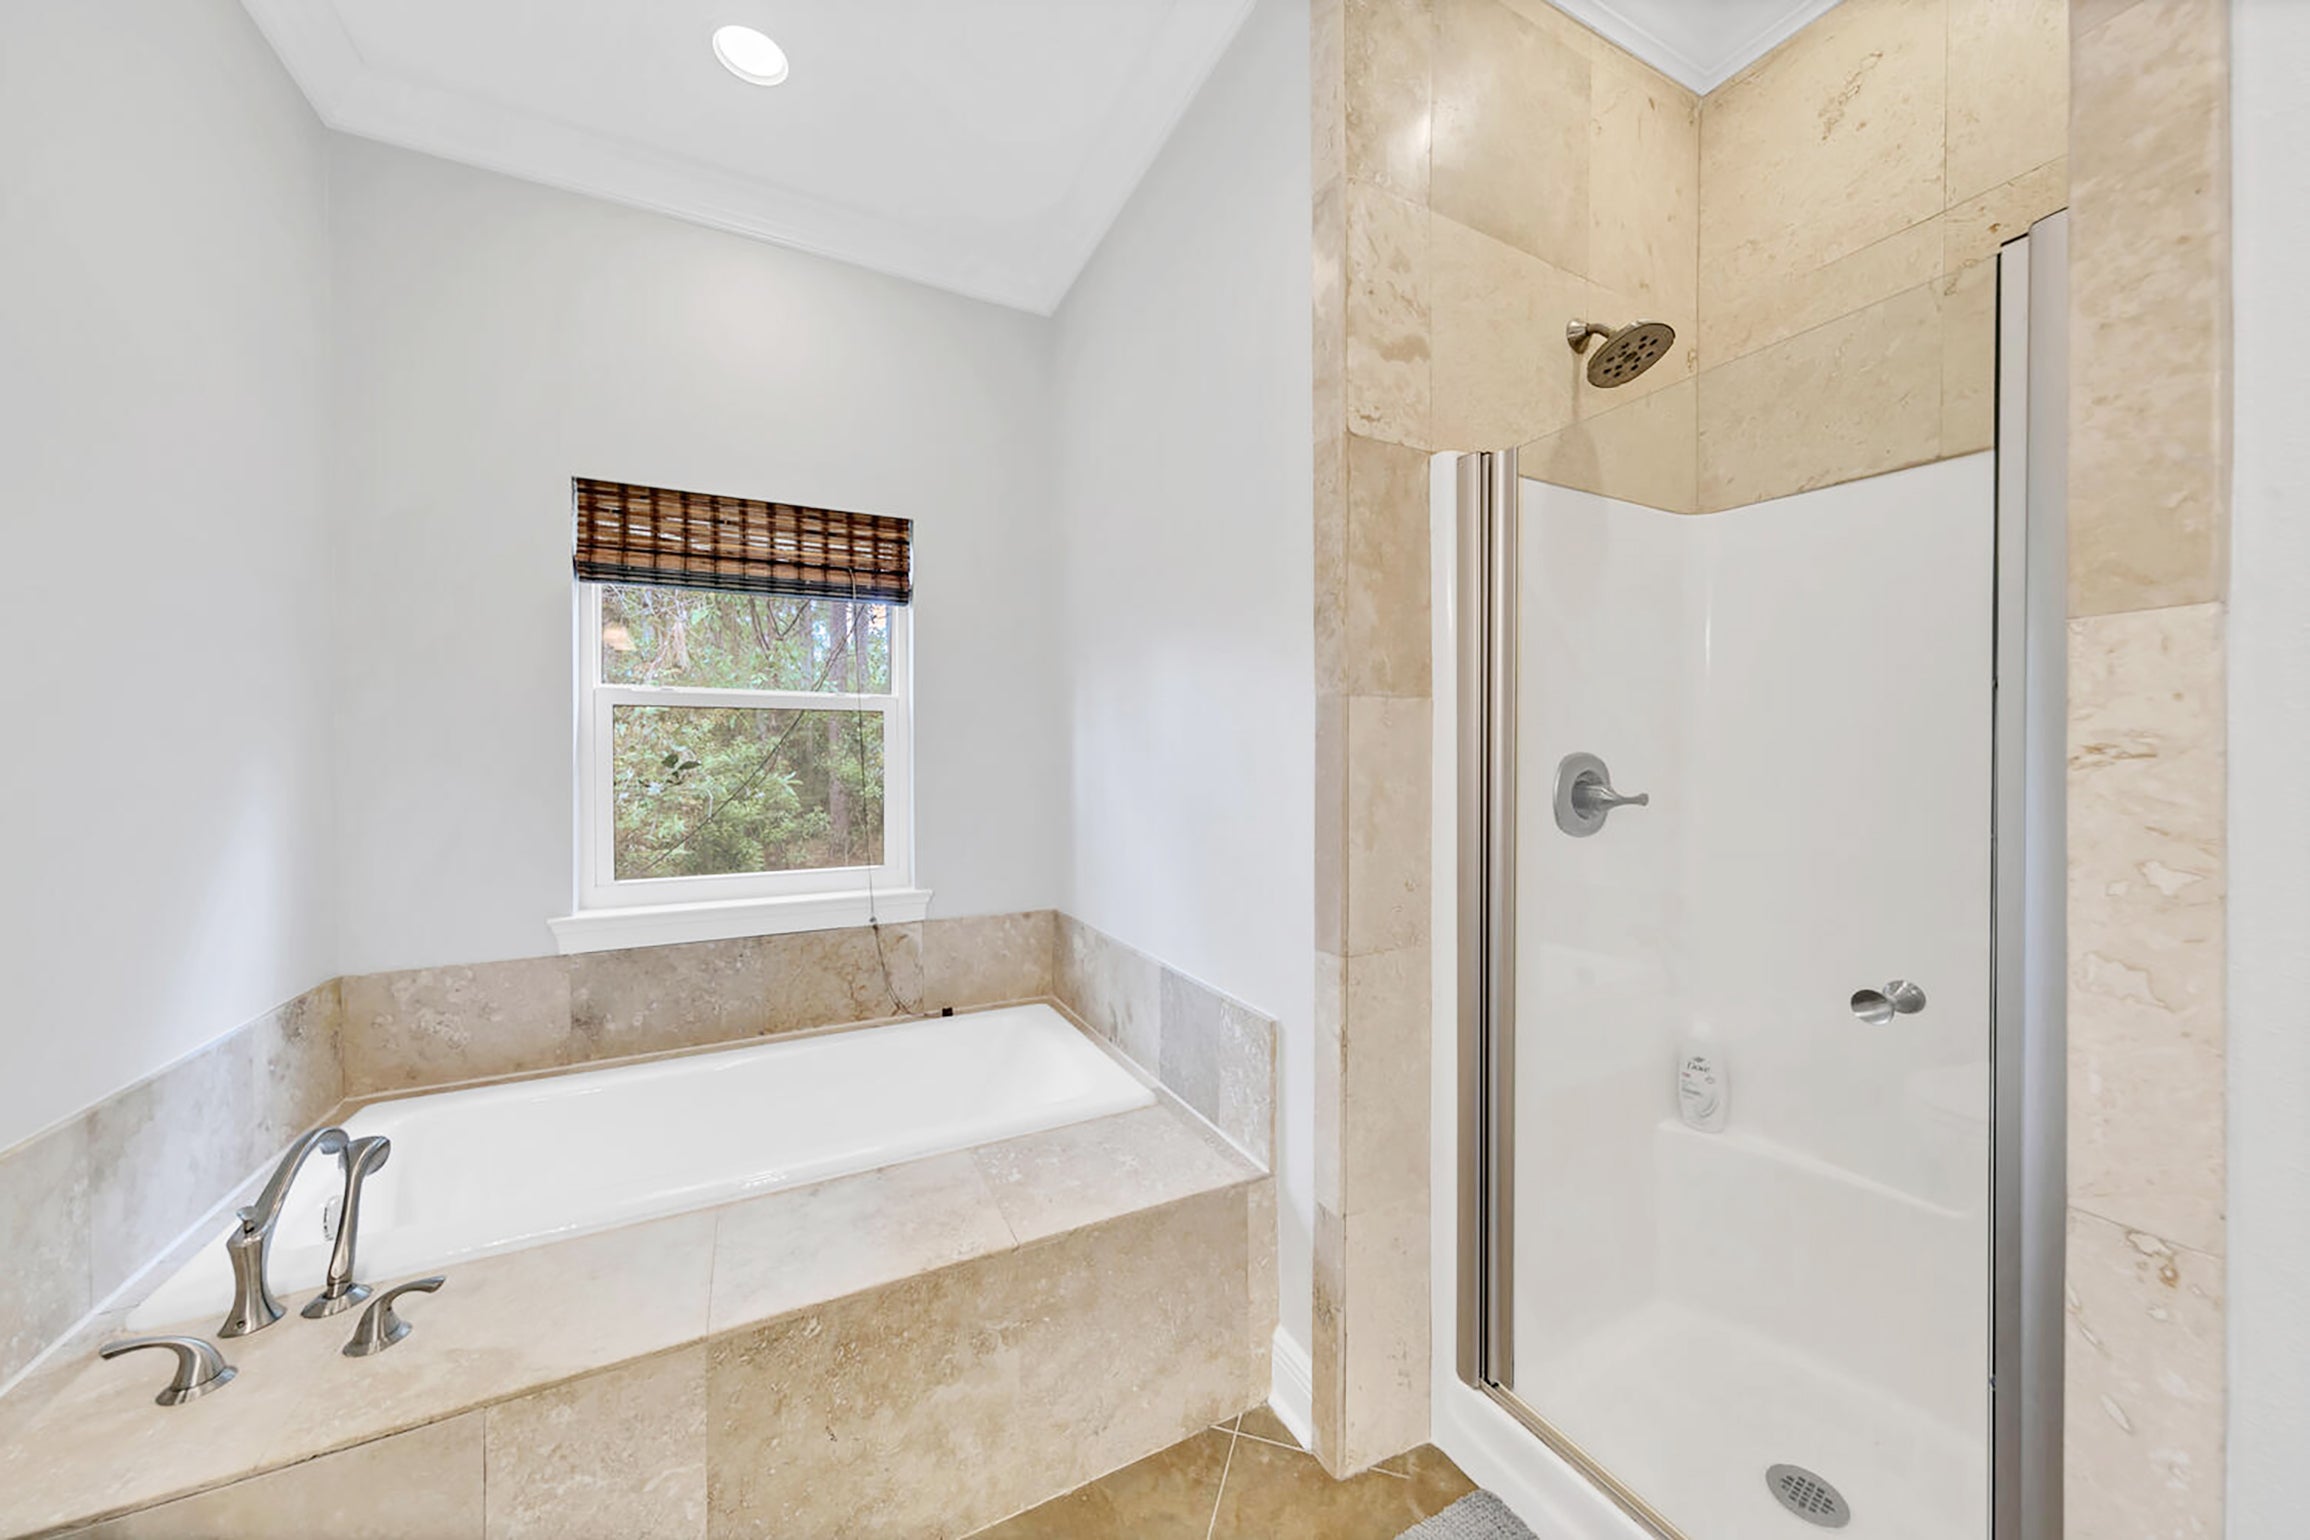 Guest bathroom tub and shower